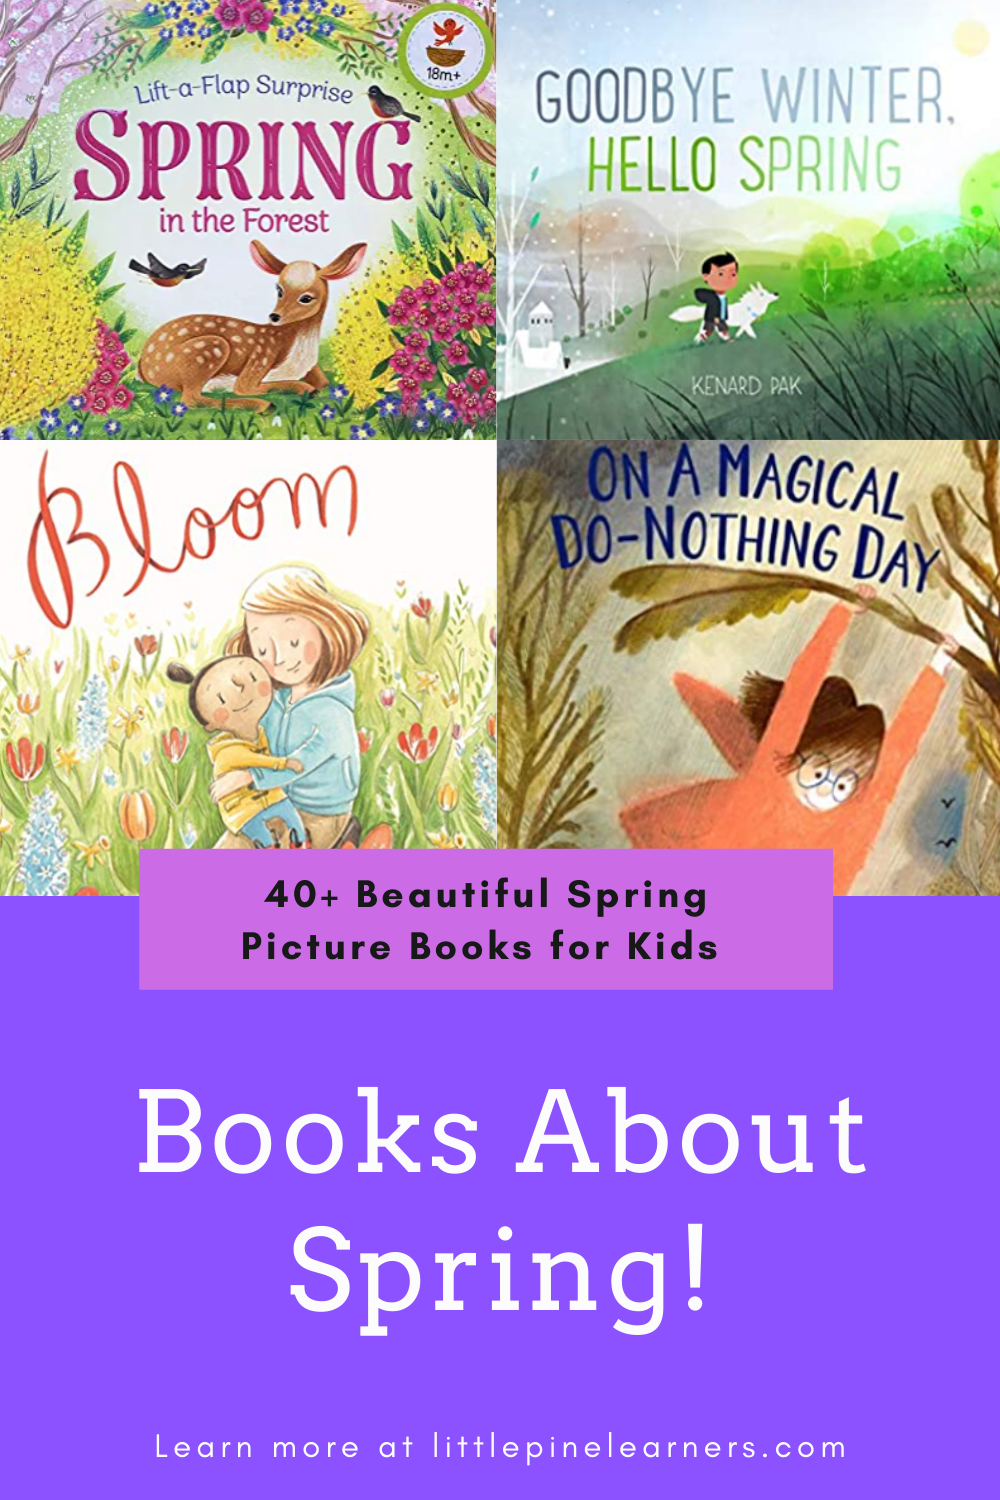 Check out 40+ nature-inspired spring books for kids right here in one spot!